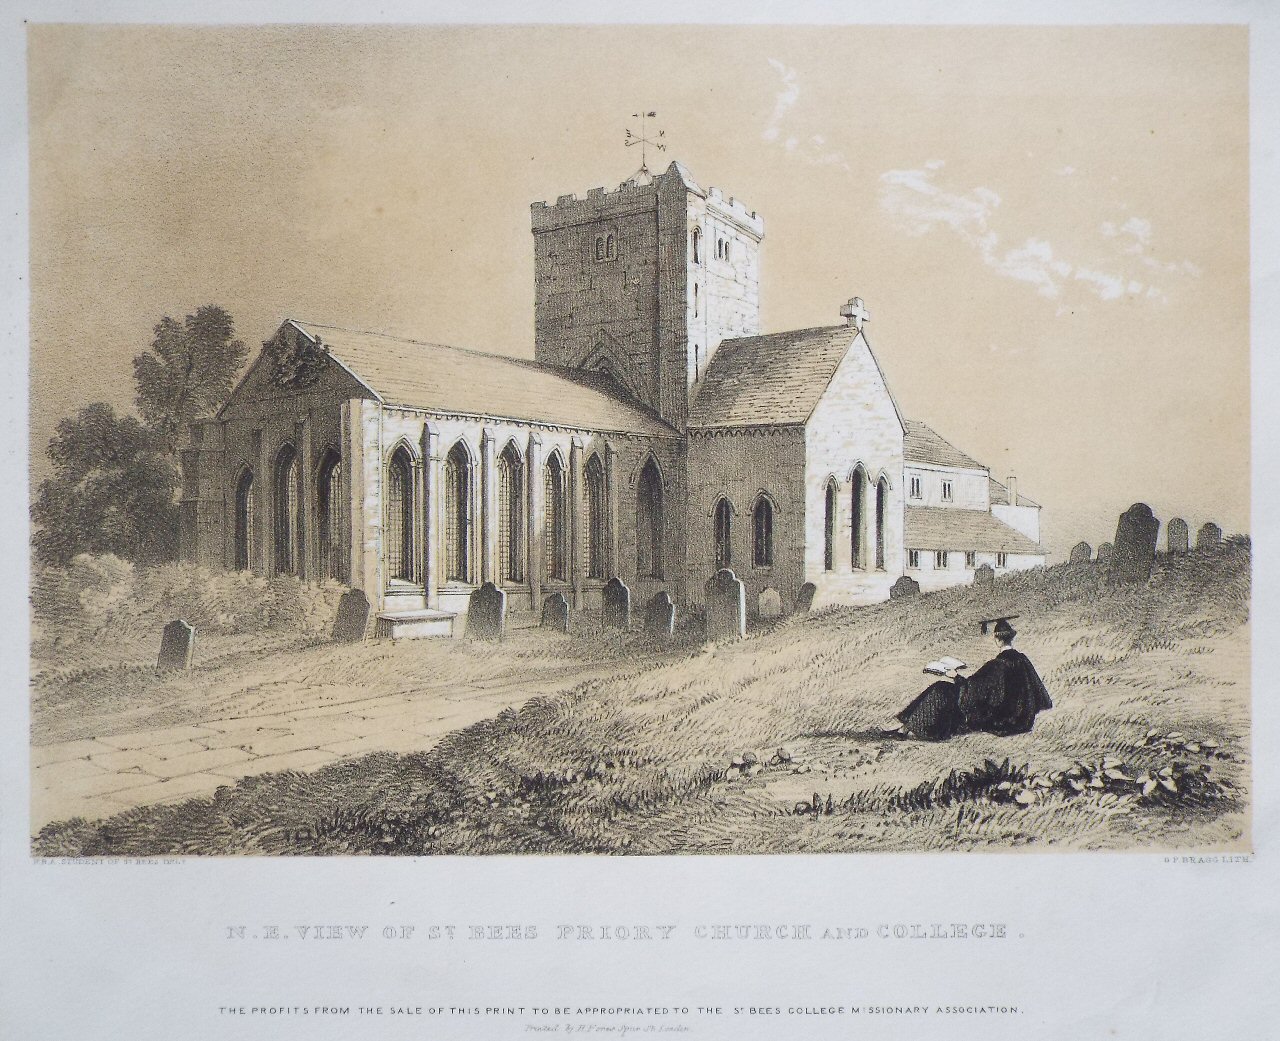 Lithograph - N. E. View of St. Bees Priory Church and College. - Bragg